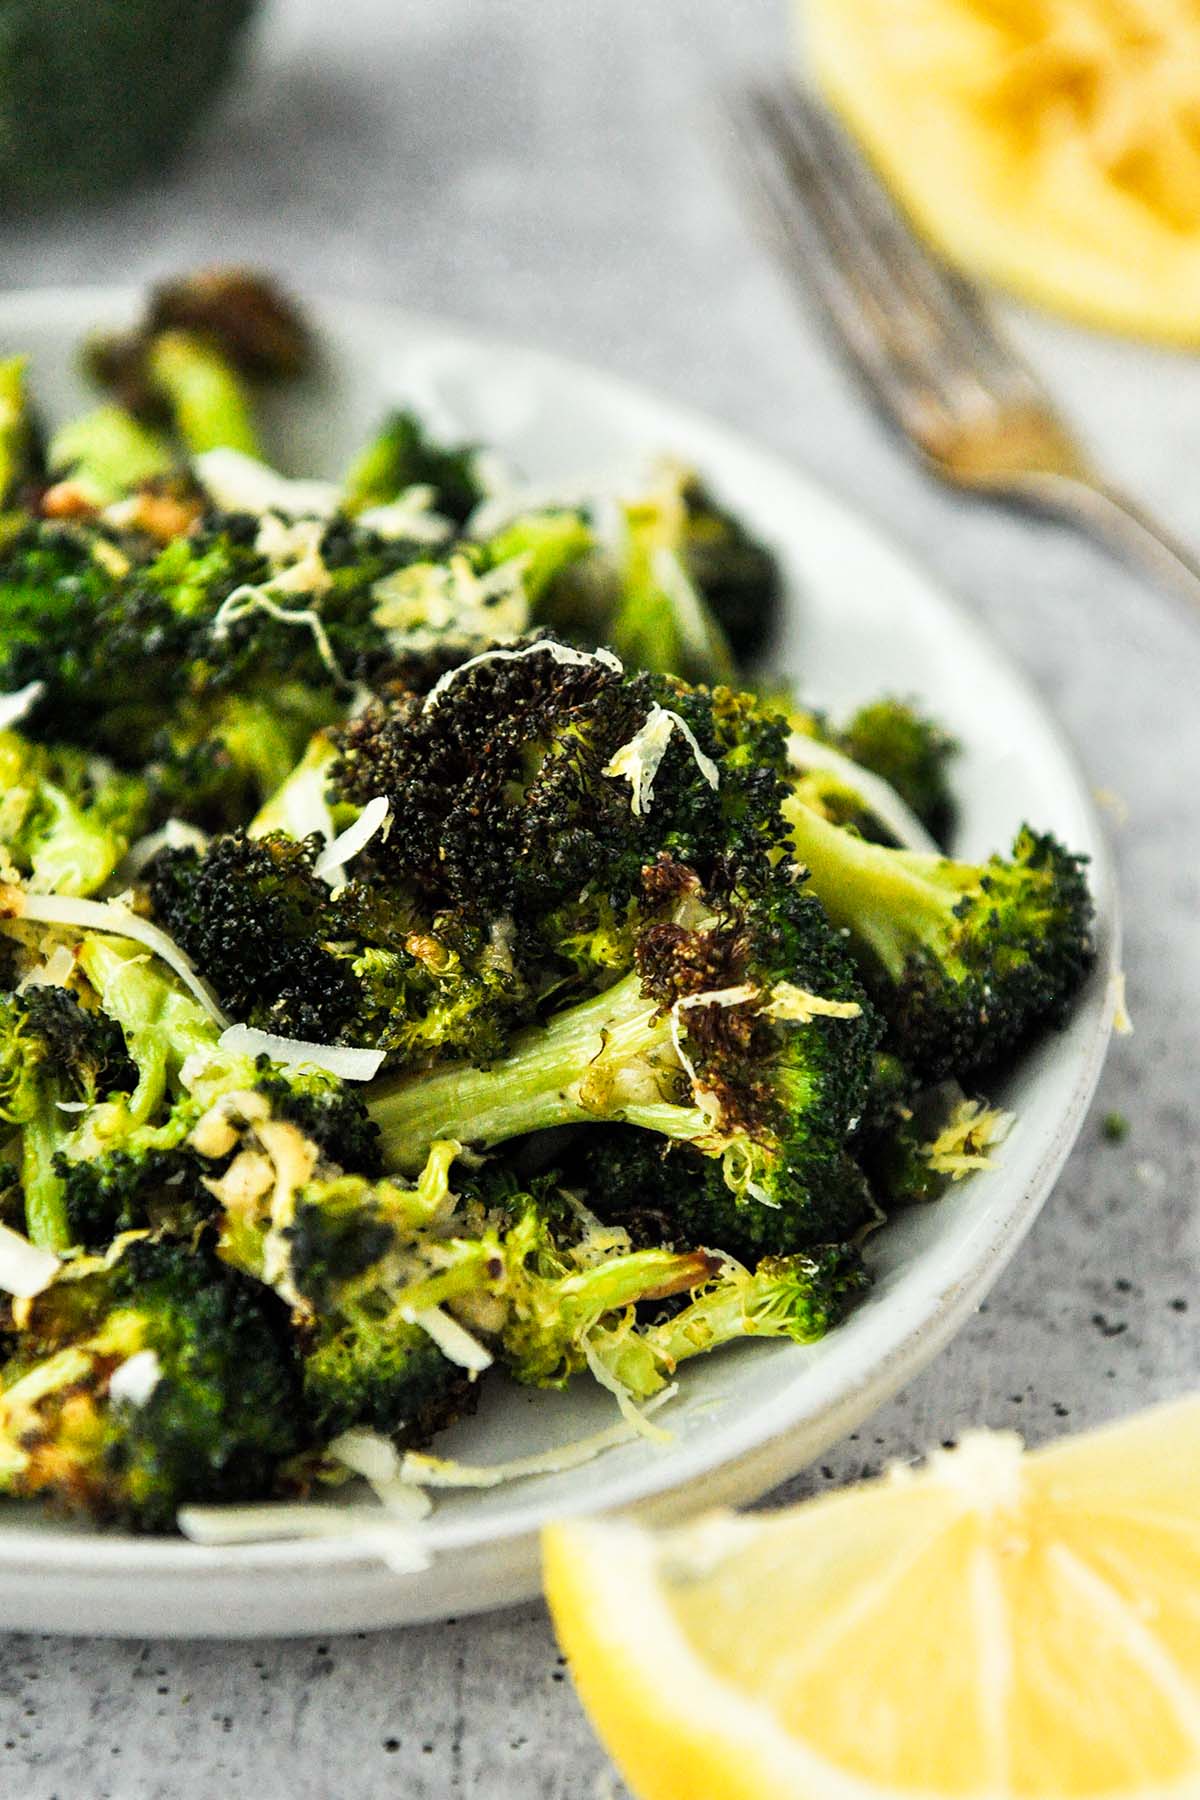 A plate of roasted broccoli with parmesan cheese.